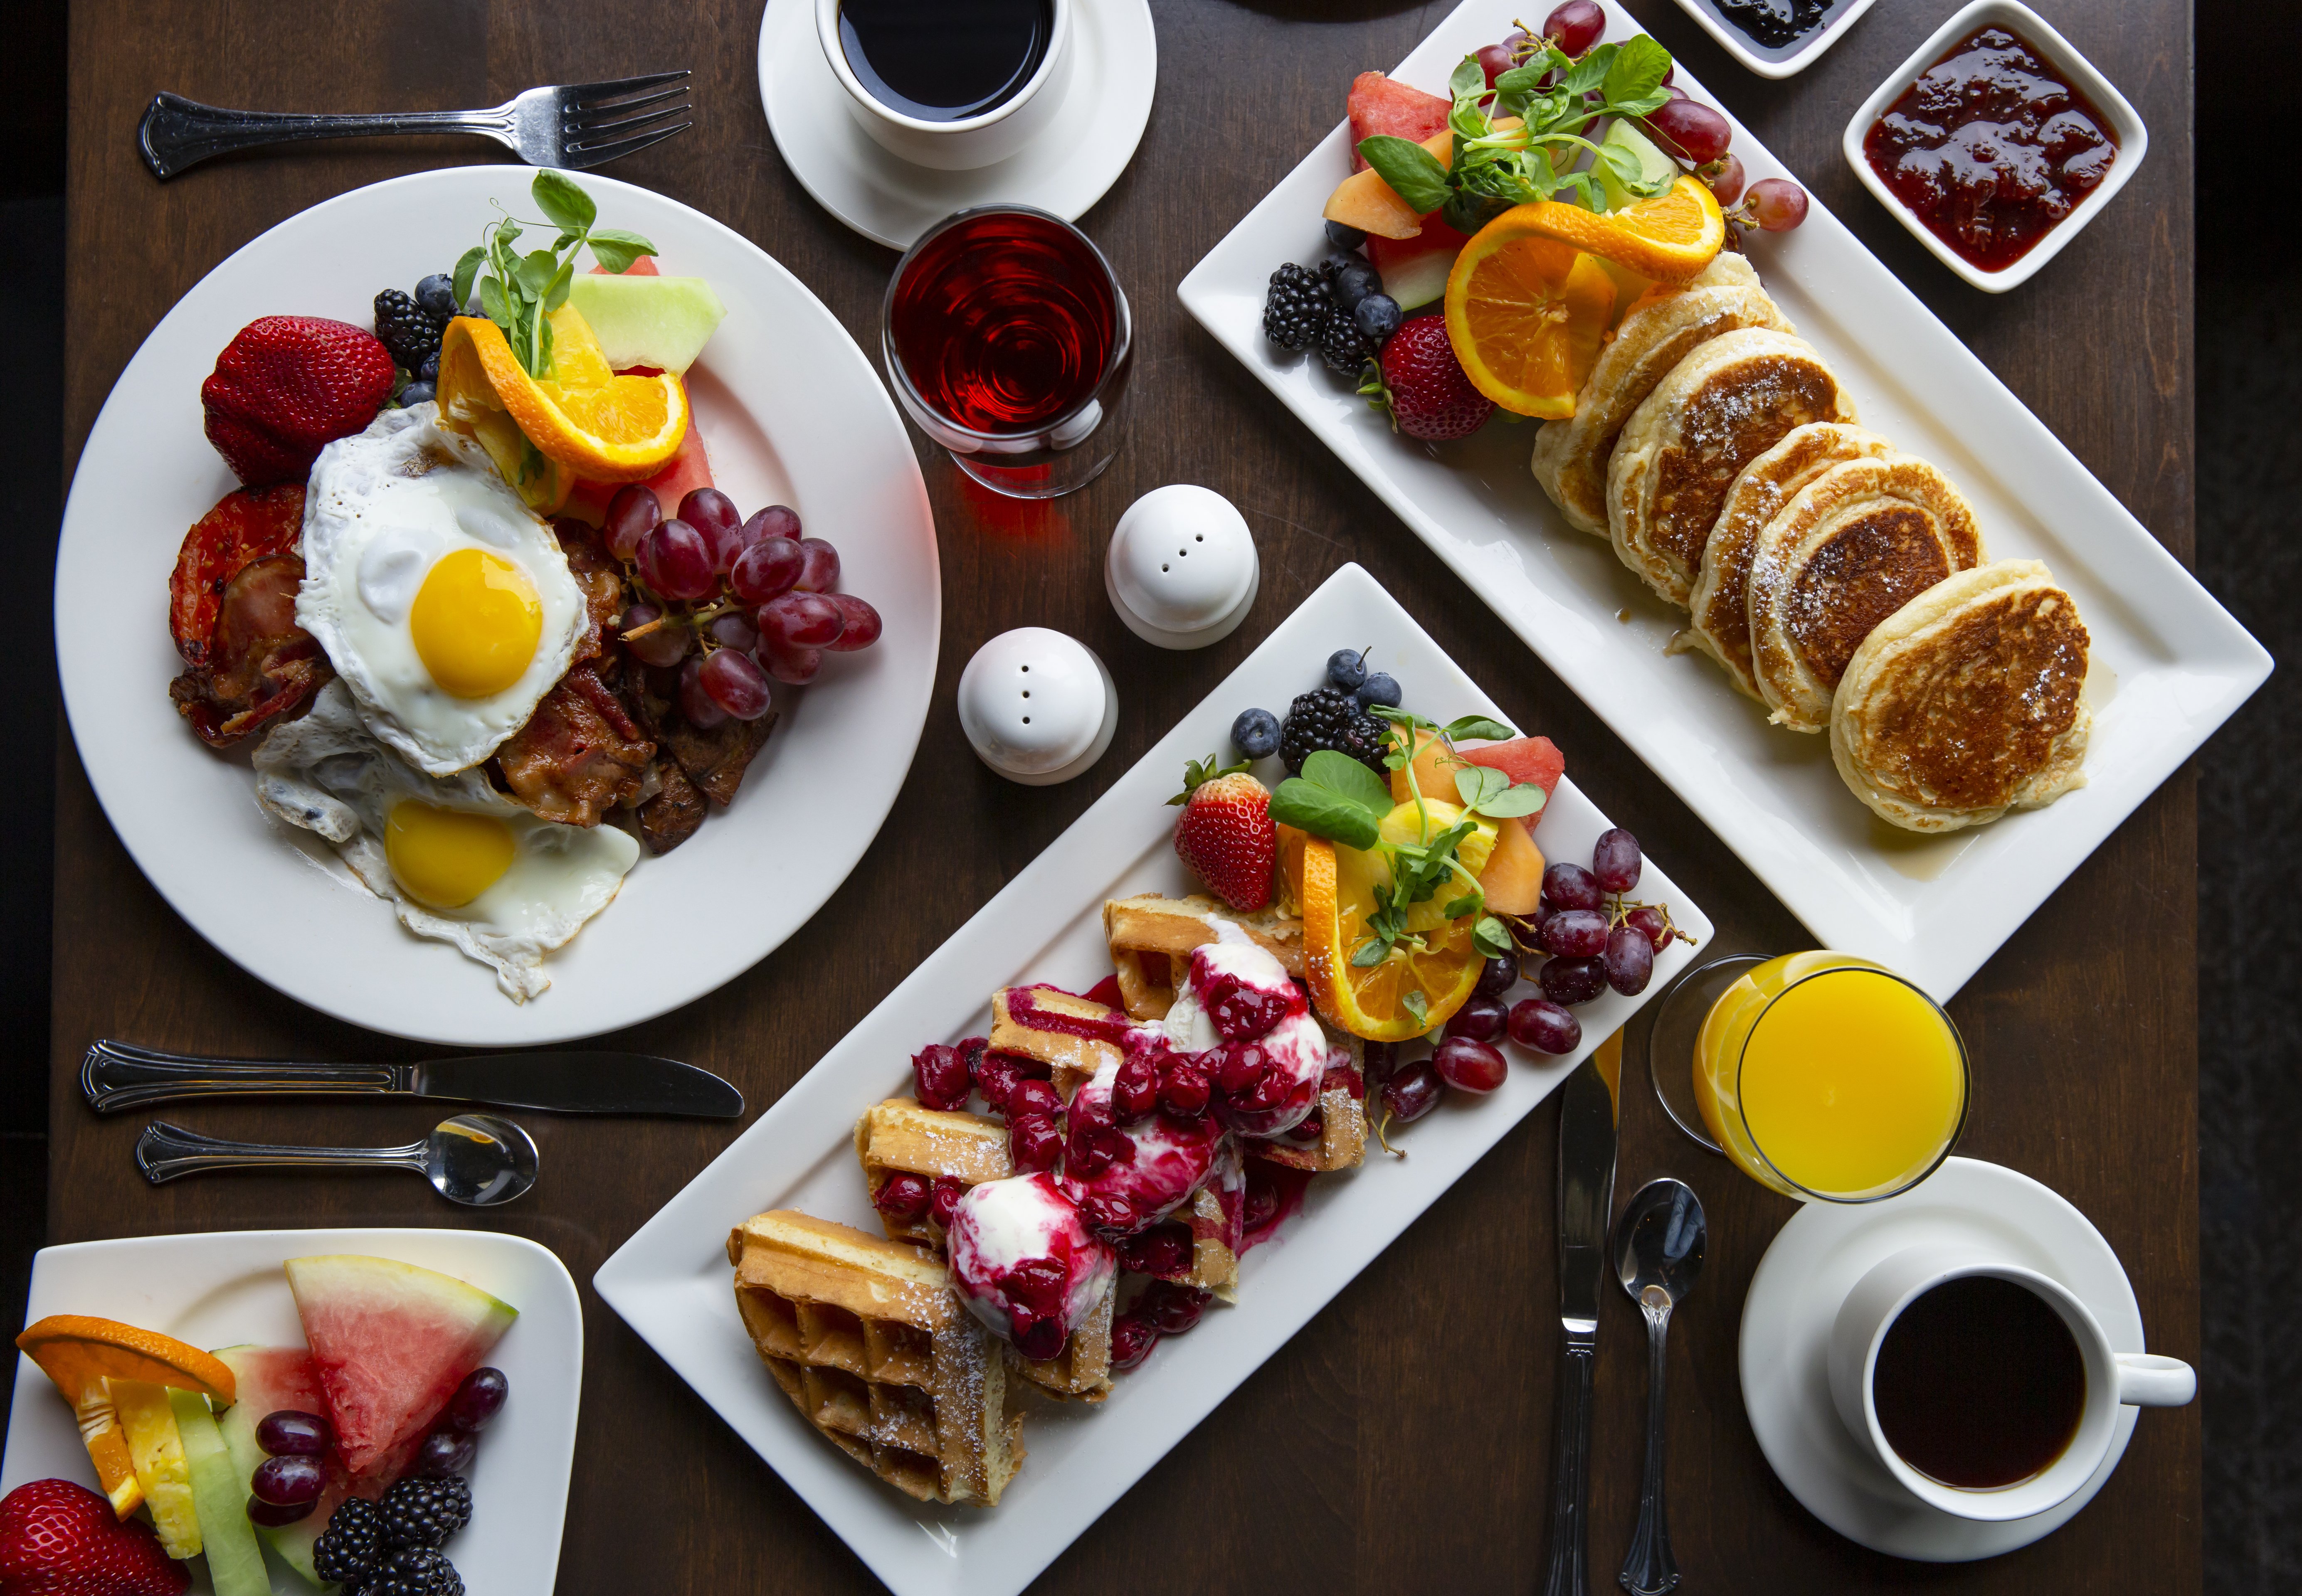 Enjoy a delicious array of breakfast options in the Rainbow Room